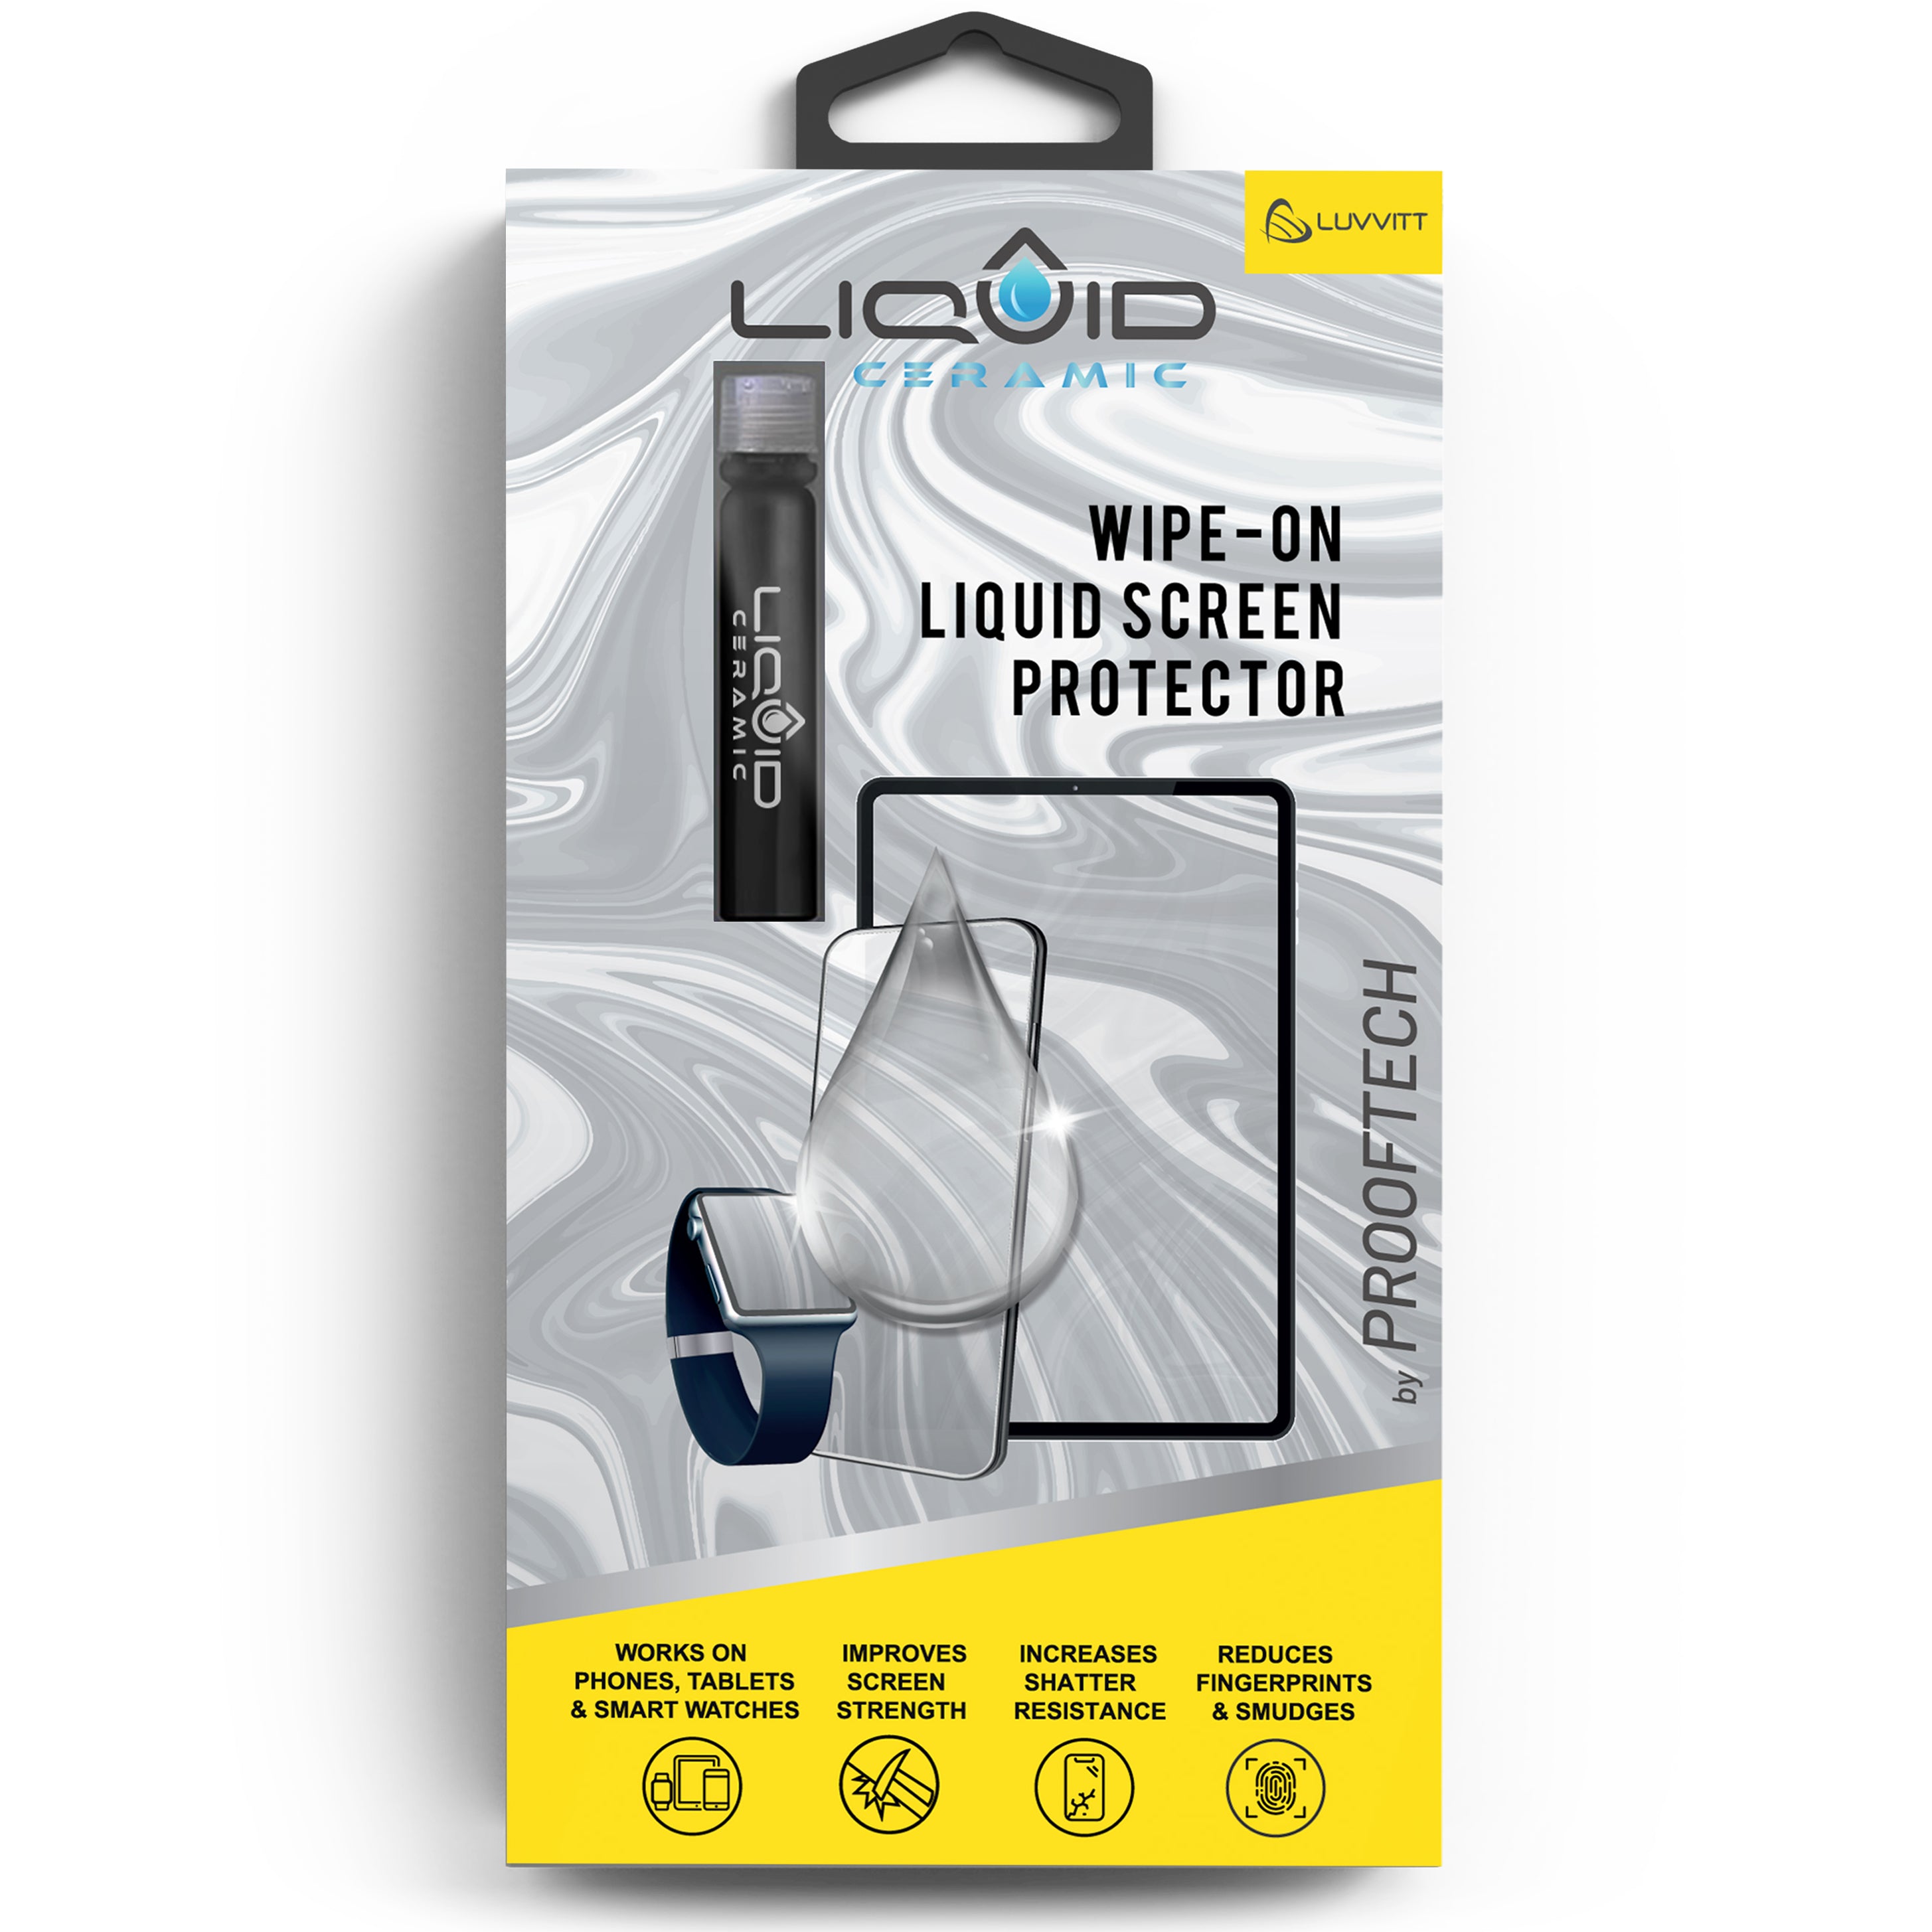 Liquid Ceramic Screen Protector for All Phones Tablets and Smart Watches - Bottle